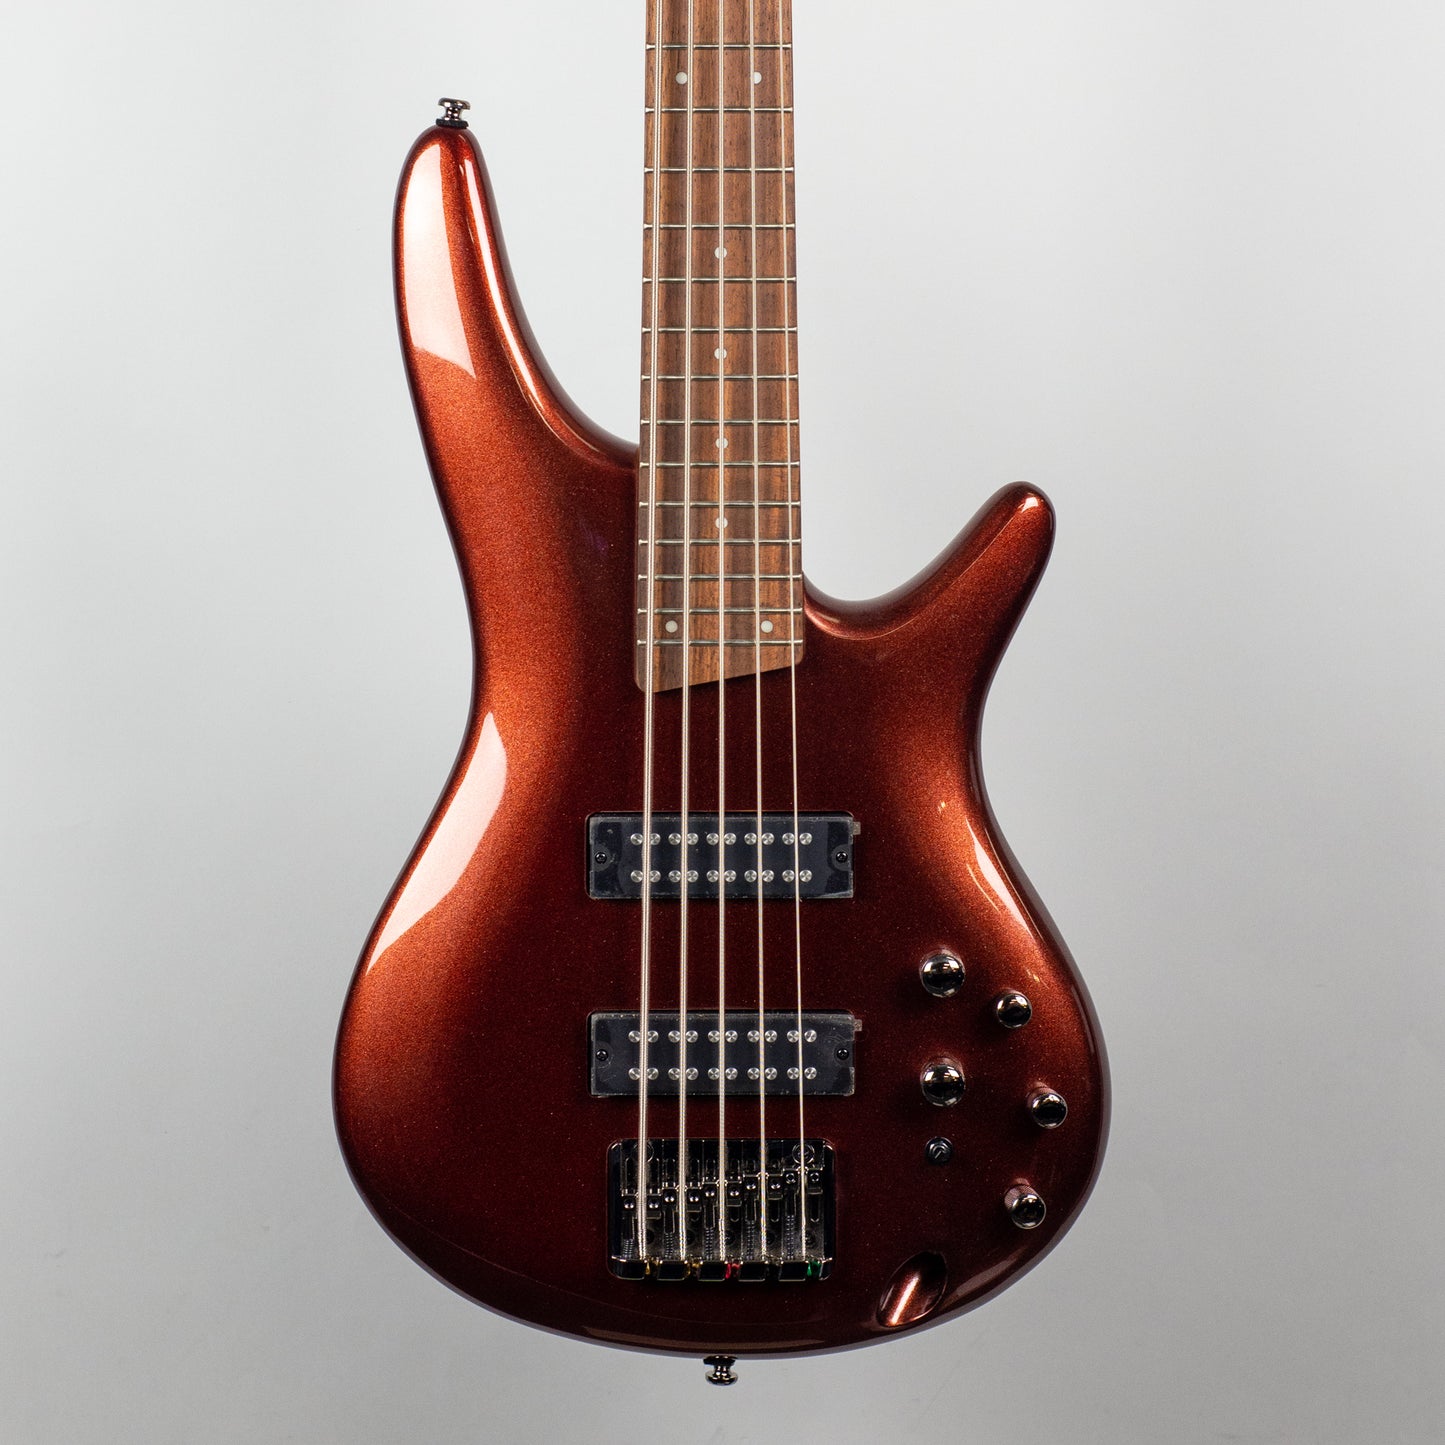 Ibanez SR305E 5-String Bass Guitar in Rootbeer Metallic